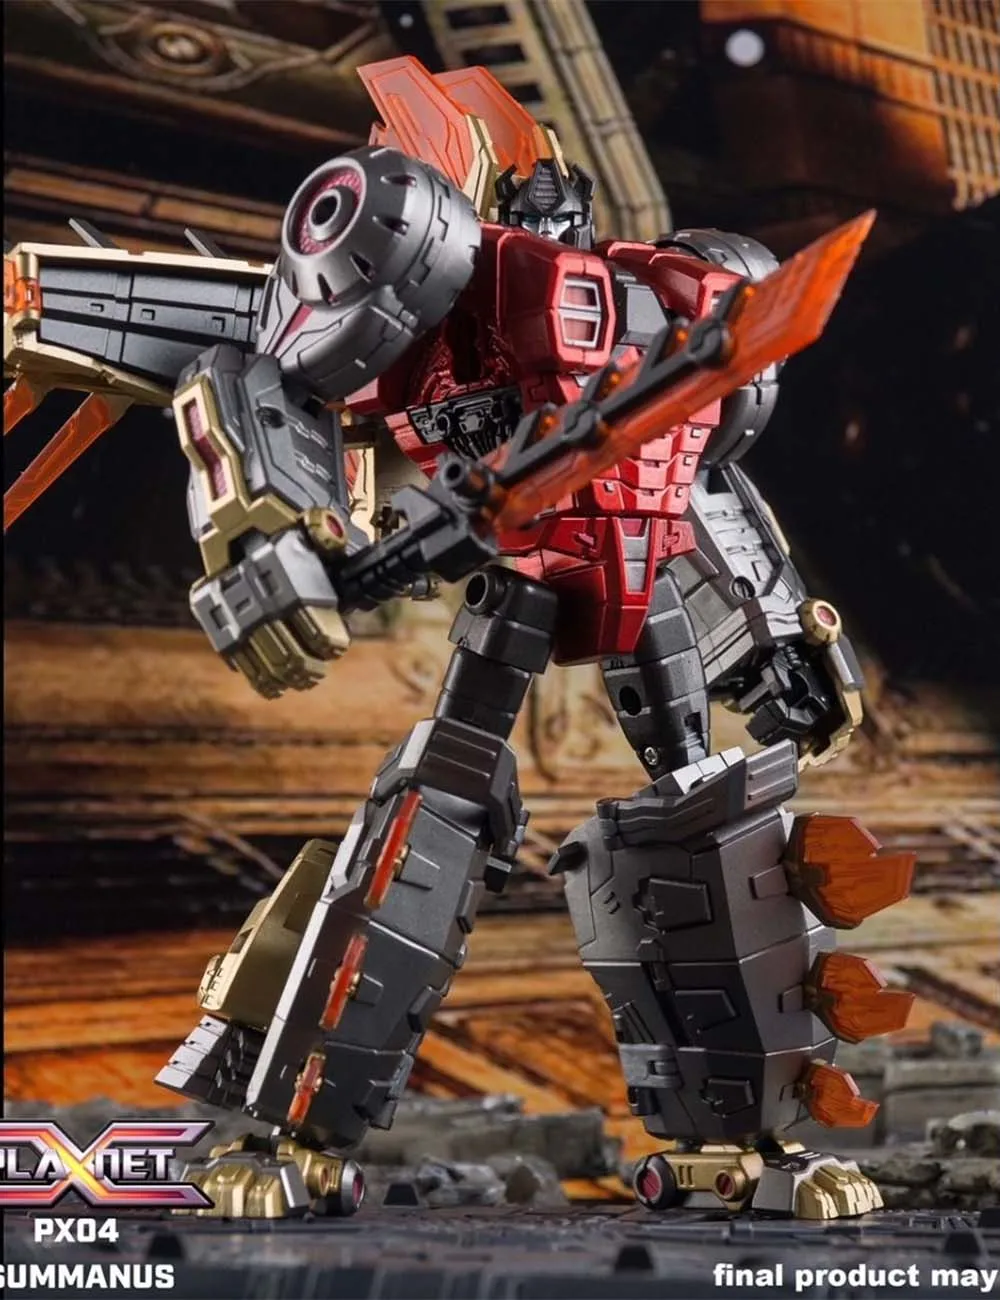 

New Transformation Toys Planet X FOC PX-04M PX04M Dinobot Summanus Snarl Metallic Color Action Figure toy in stock